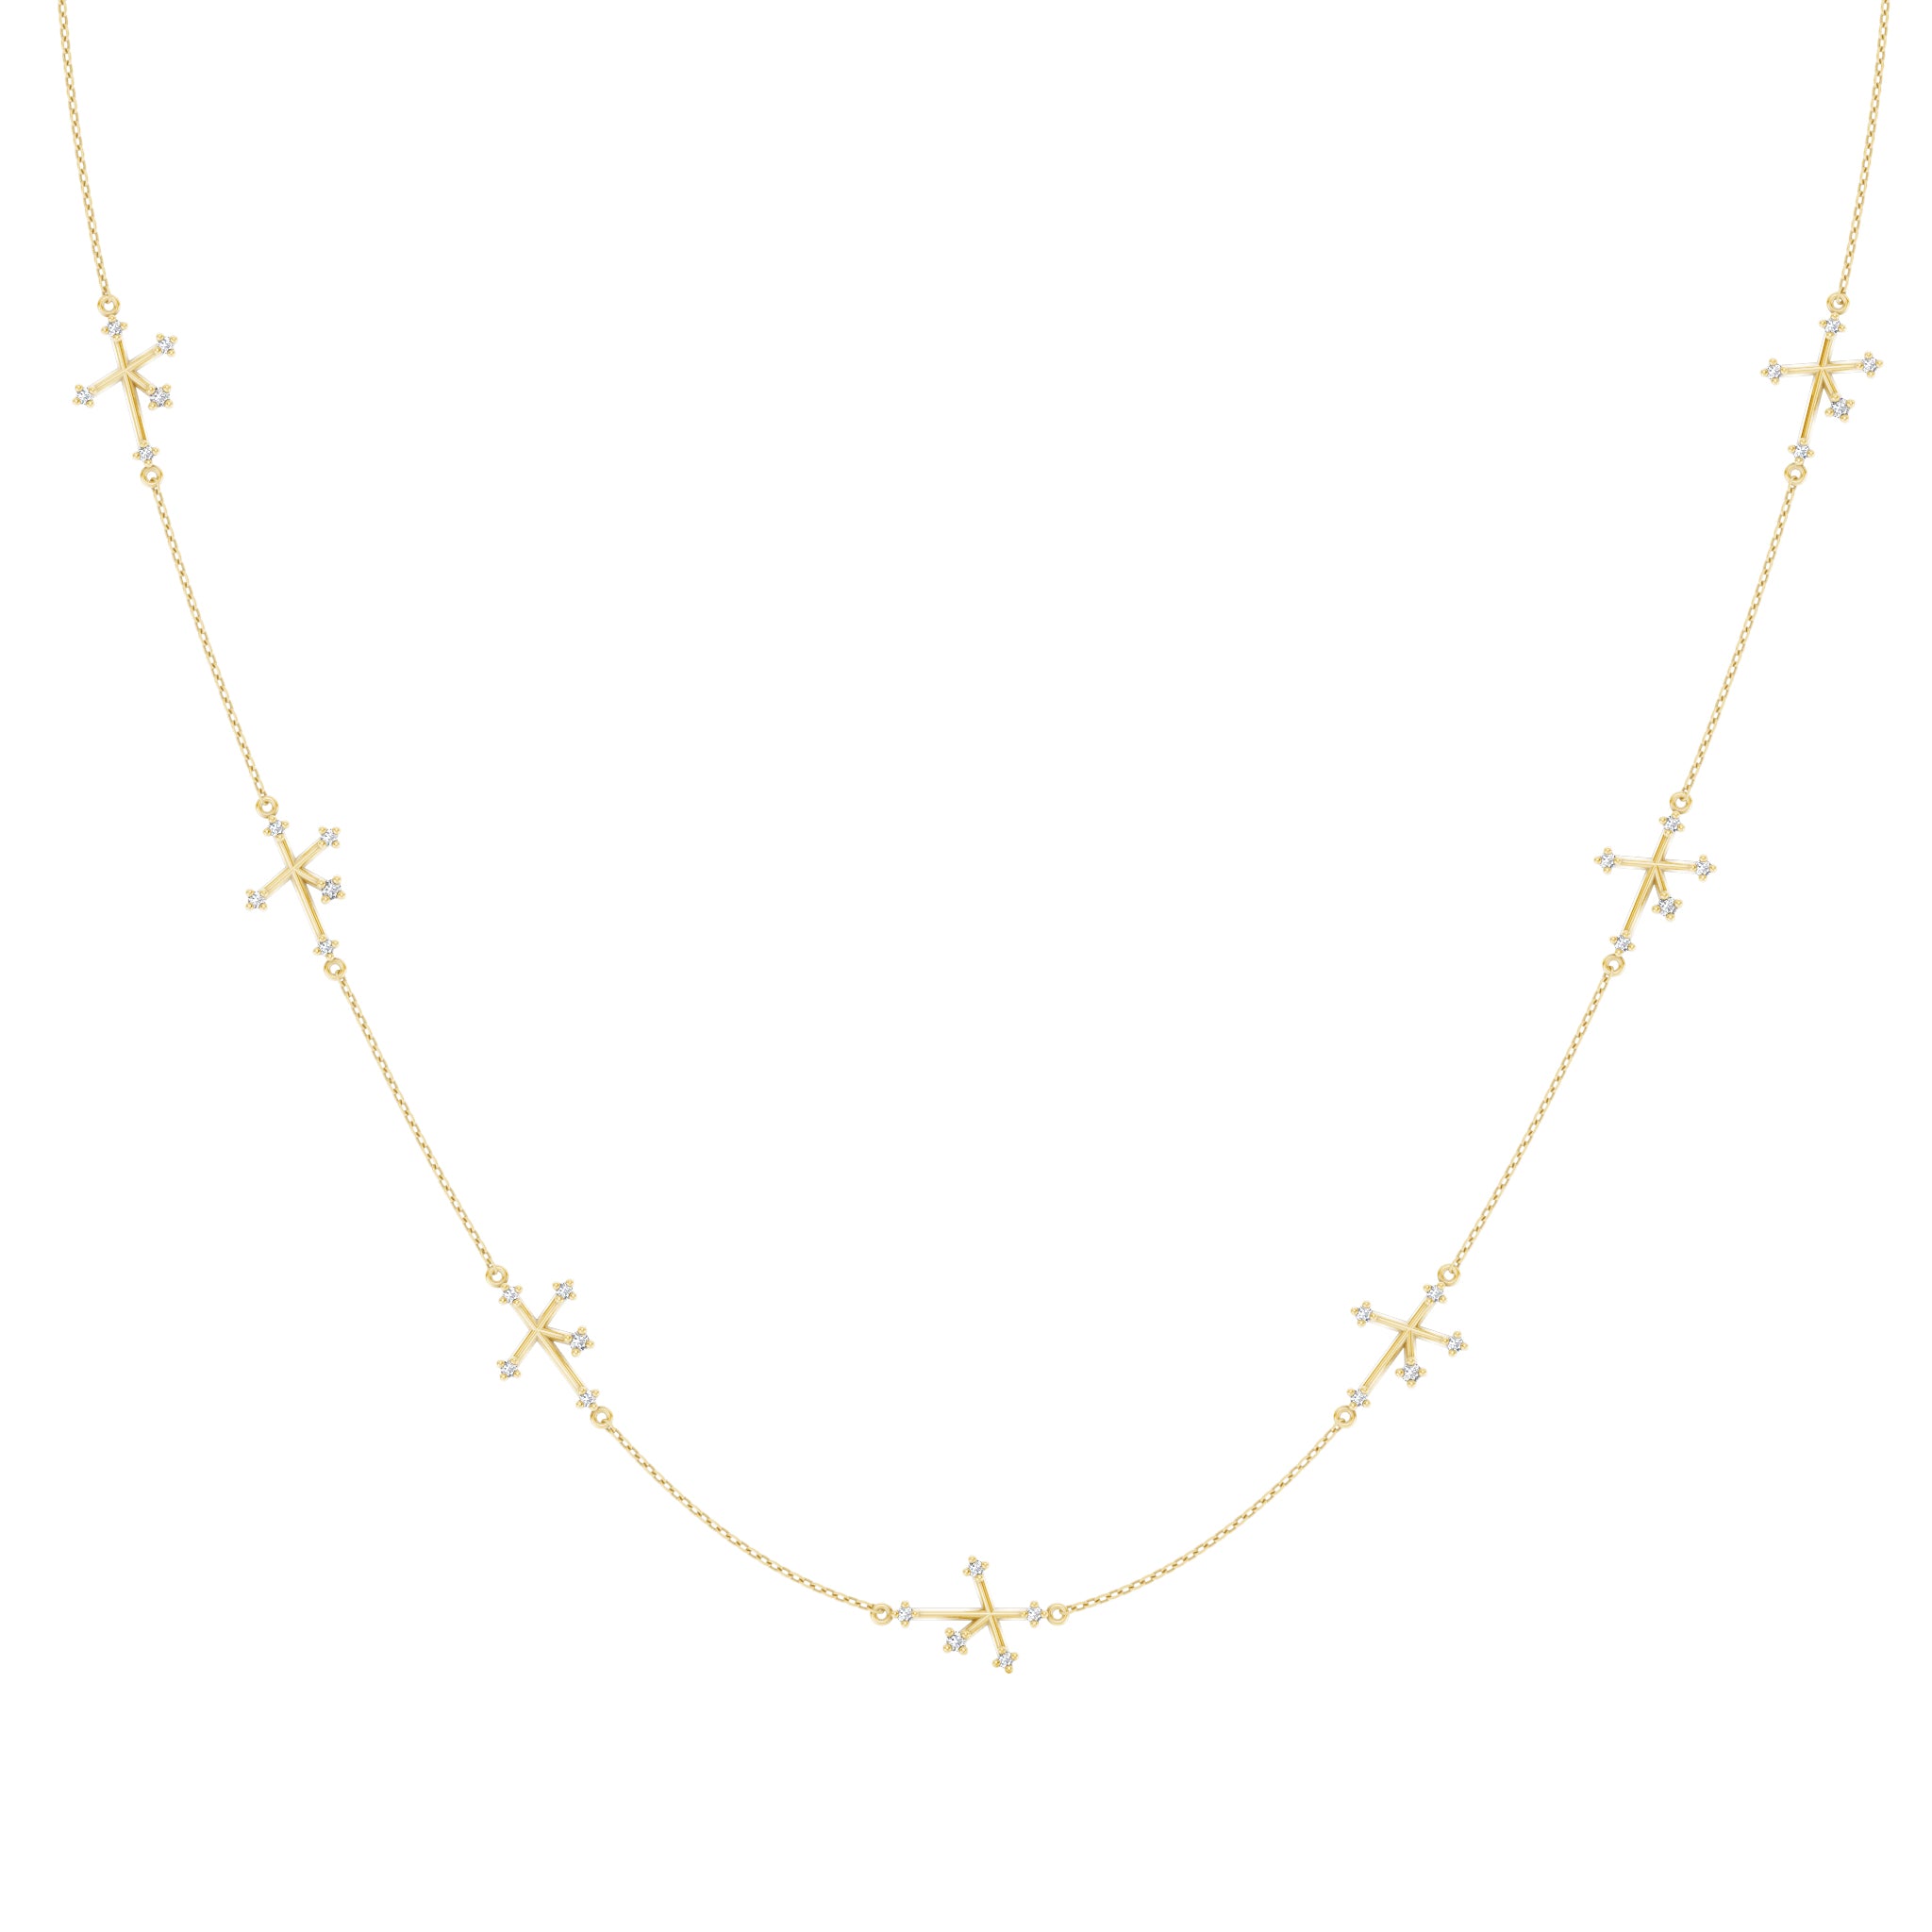 Shimansky - Southern Cross Diamond Necklace Crafted in 14K Yellow Gold